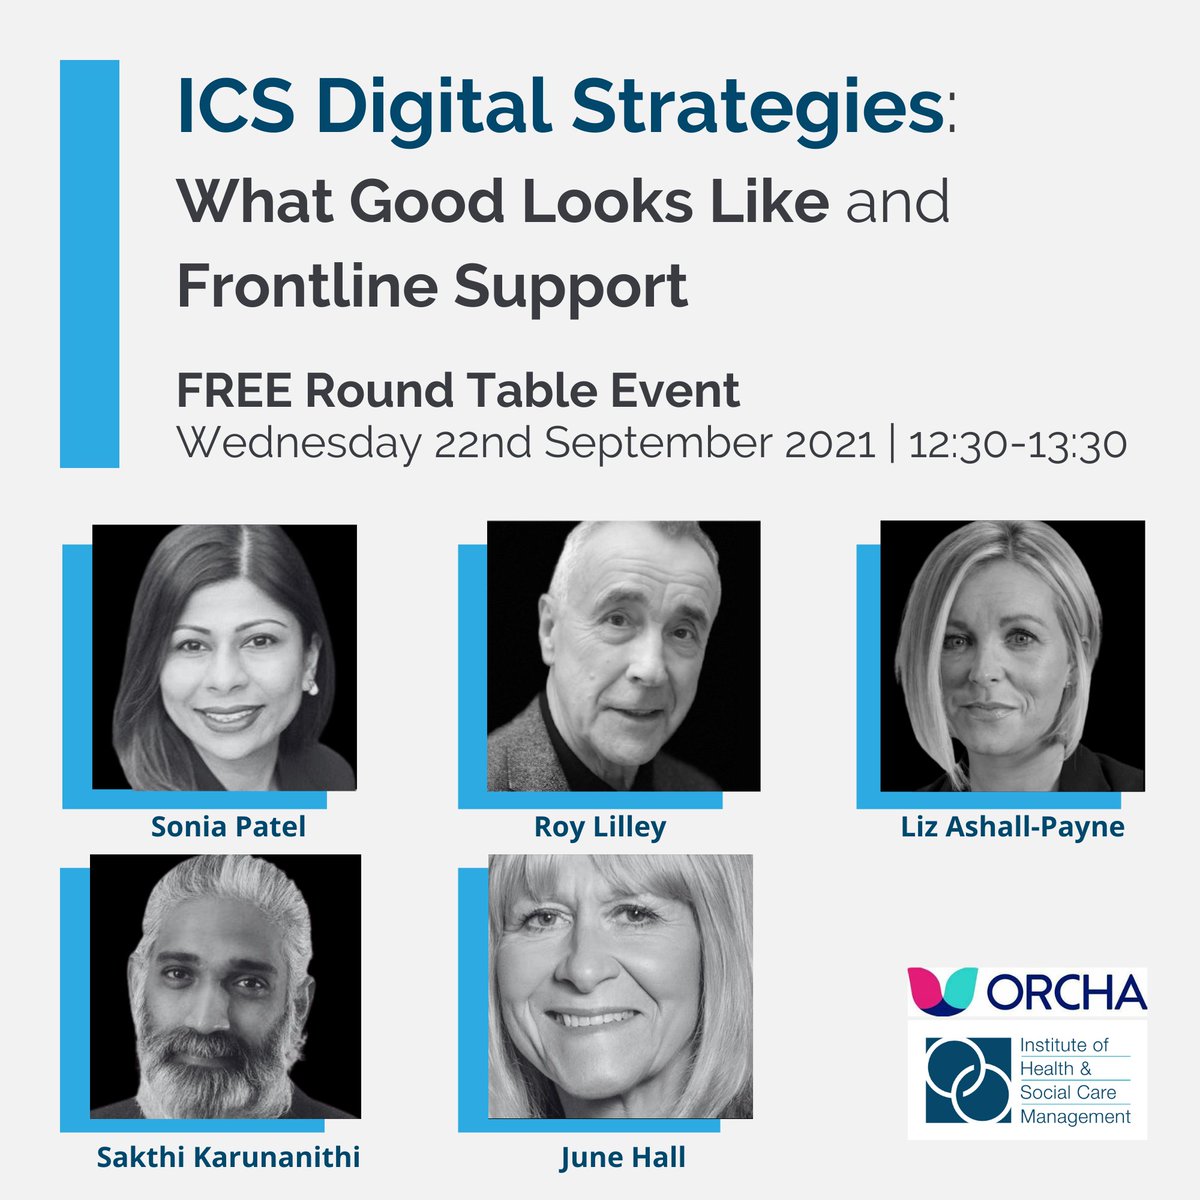 Last chance to register for today's webinar: What does good look like for ICS digital strategies? 💡 Join @RoyLilley (@IHM_tweets) with @chat2sonia (@NHSX), @LizAshallPayne, and @dr_sakthi (@LancashireCC) Register for free: eventbrite.co.uk/e/ics-digital-… #IHSCM #DigitalHealth #ICS